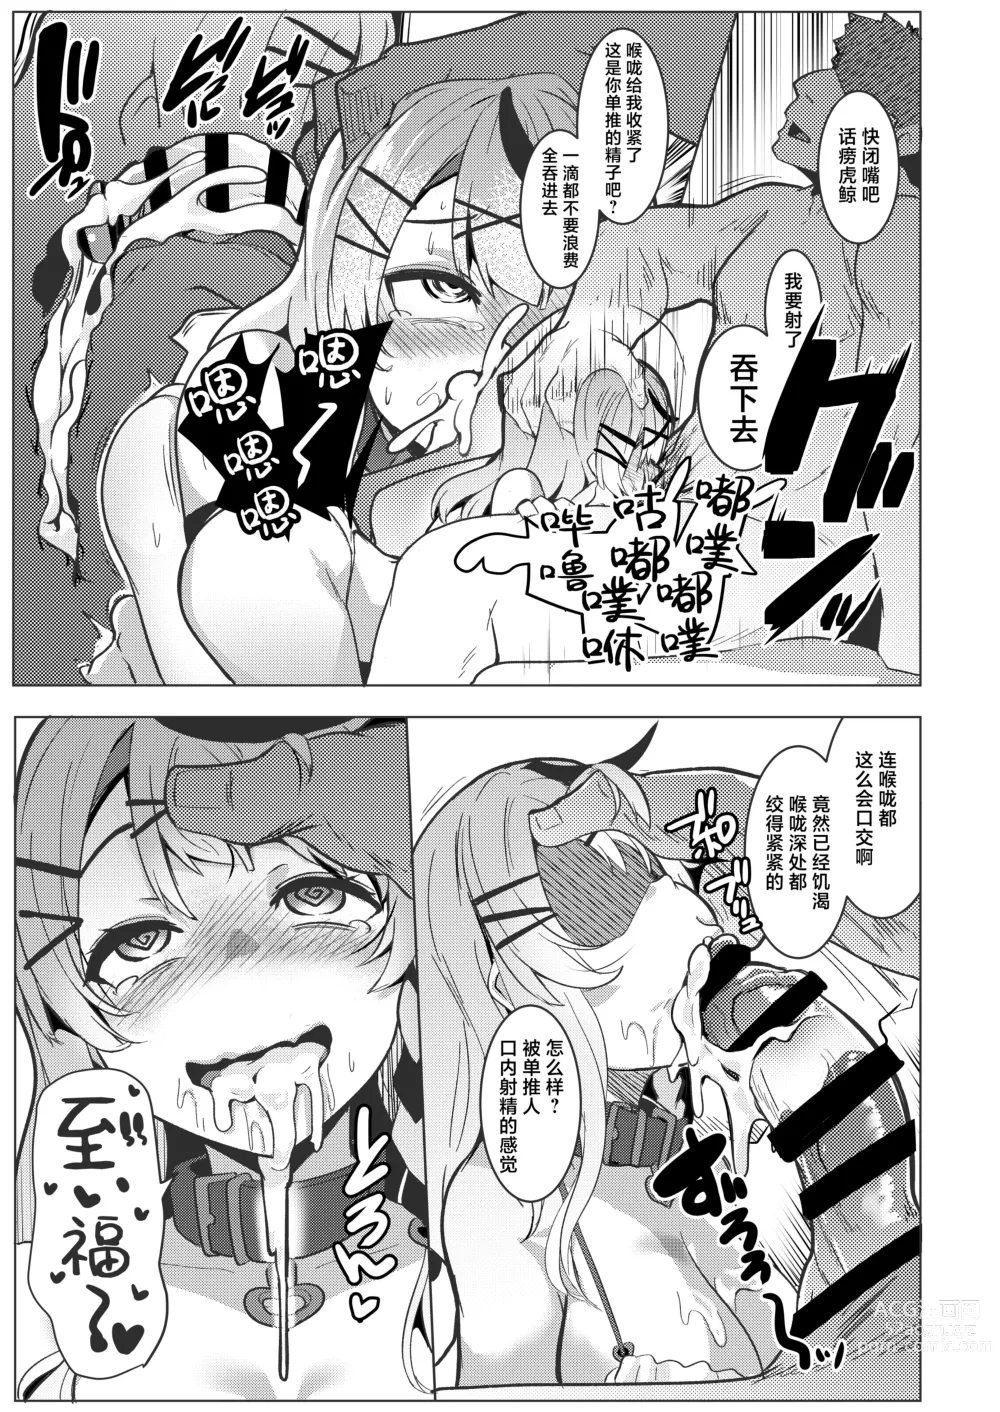 Page 9 of doujinshi Osucollab